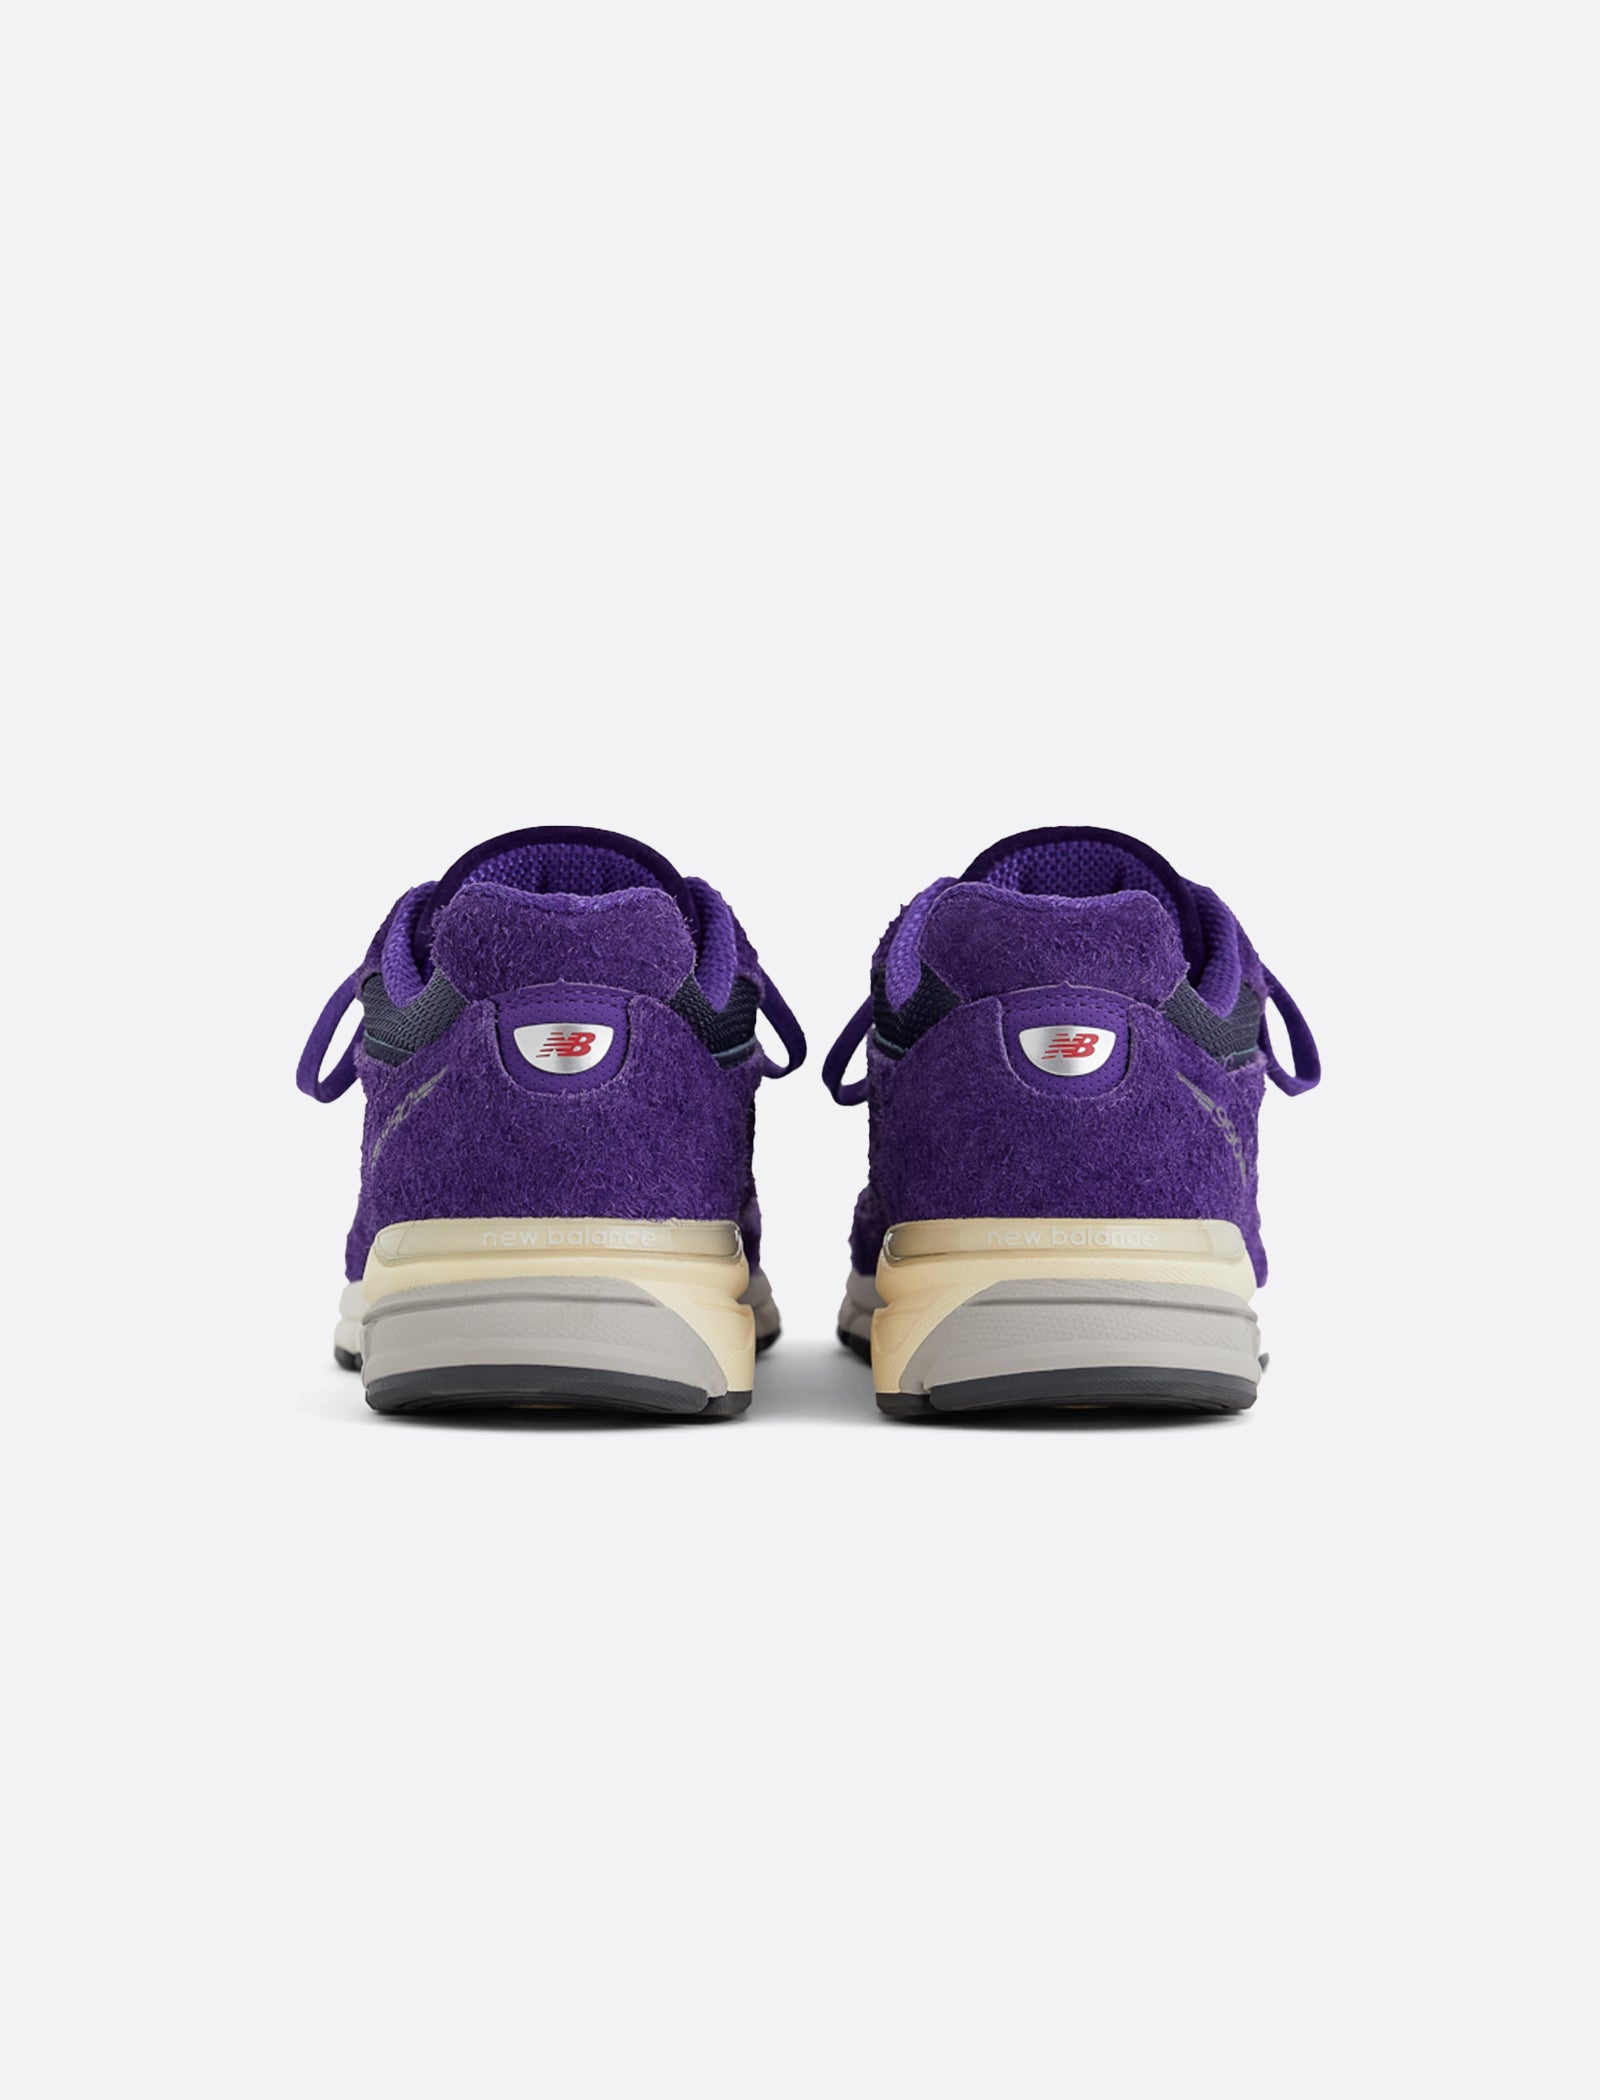 990 v4 MADE IN USA "PURPLE SUEDE"